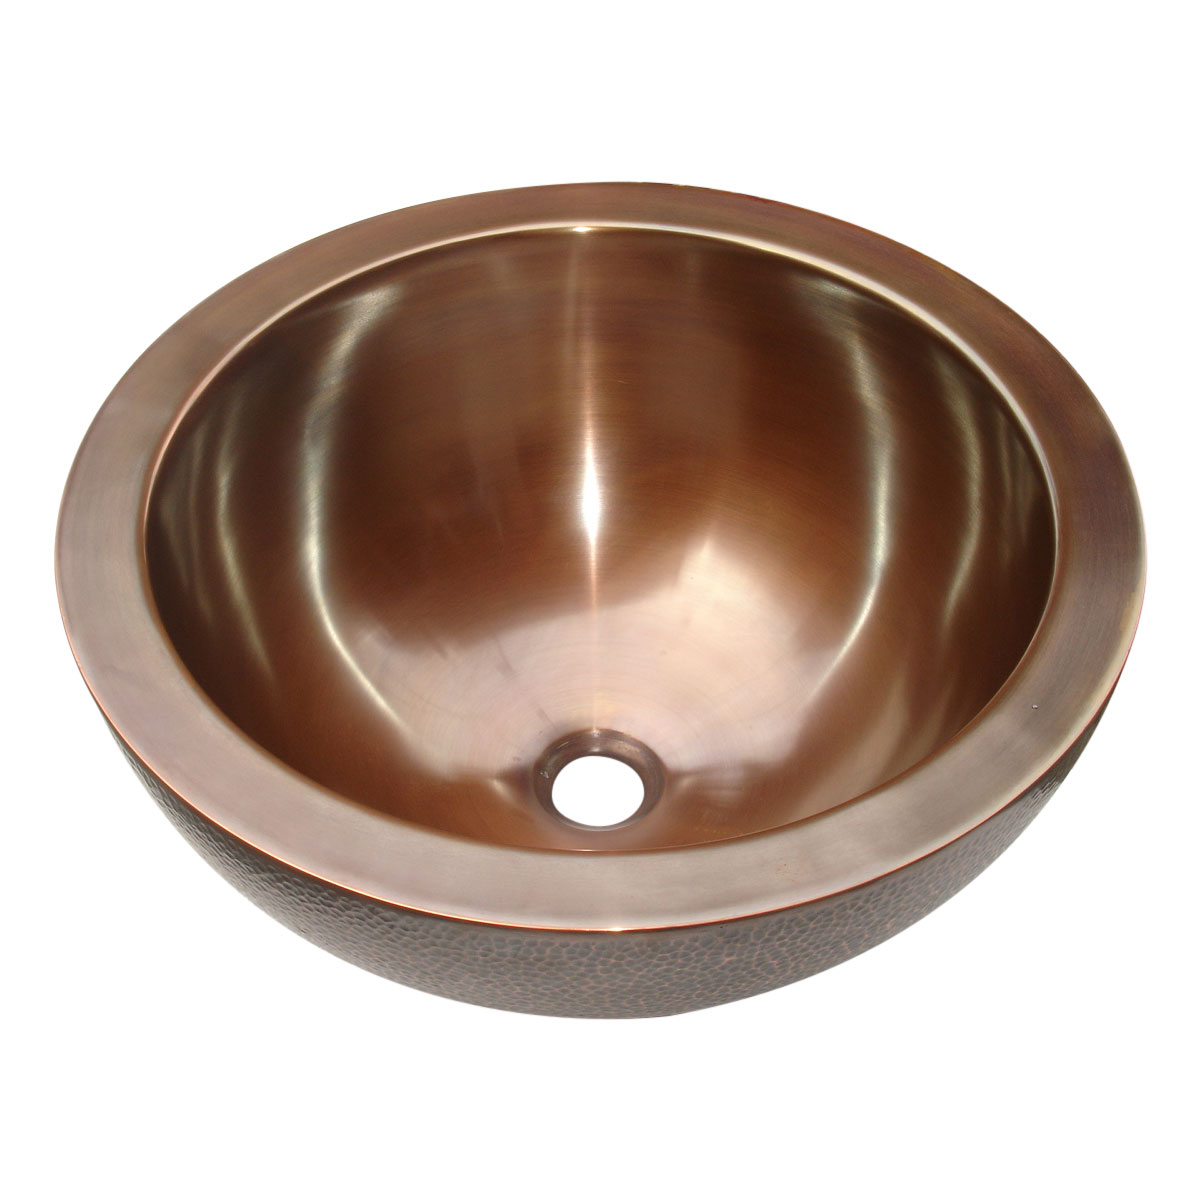 Double Walled Outside Hammered Copper Sink